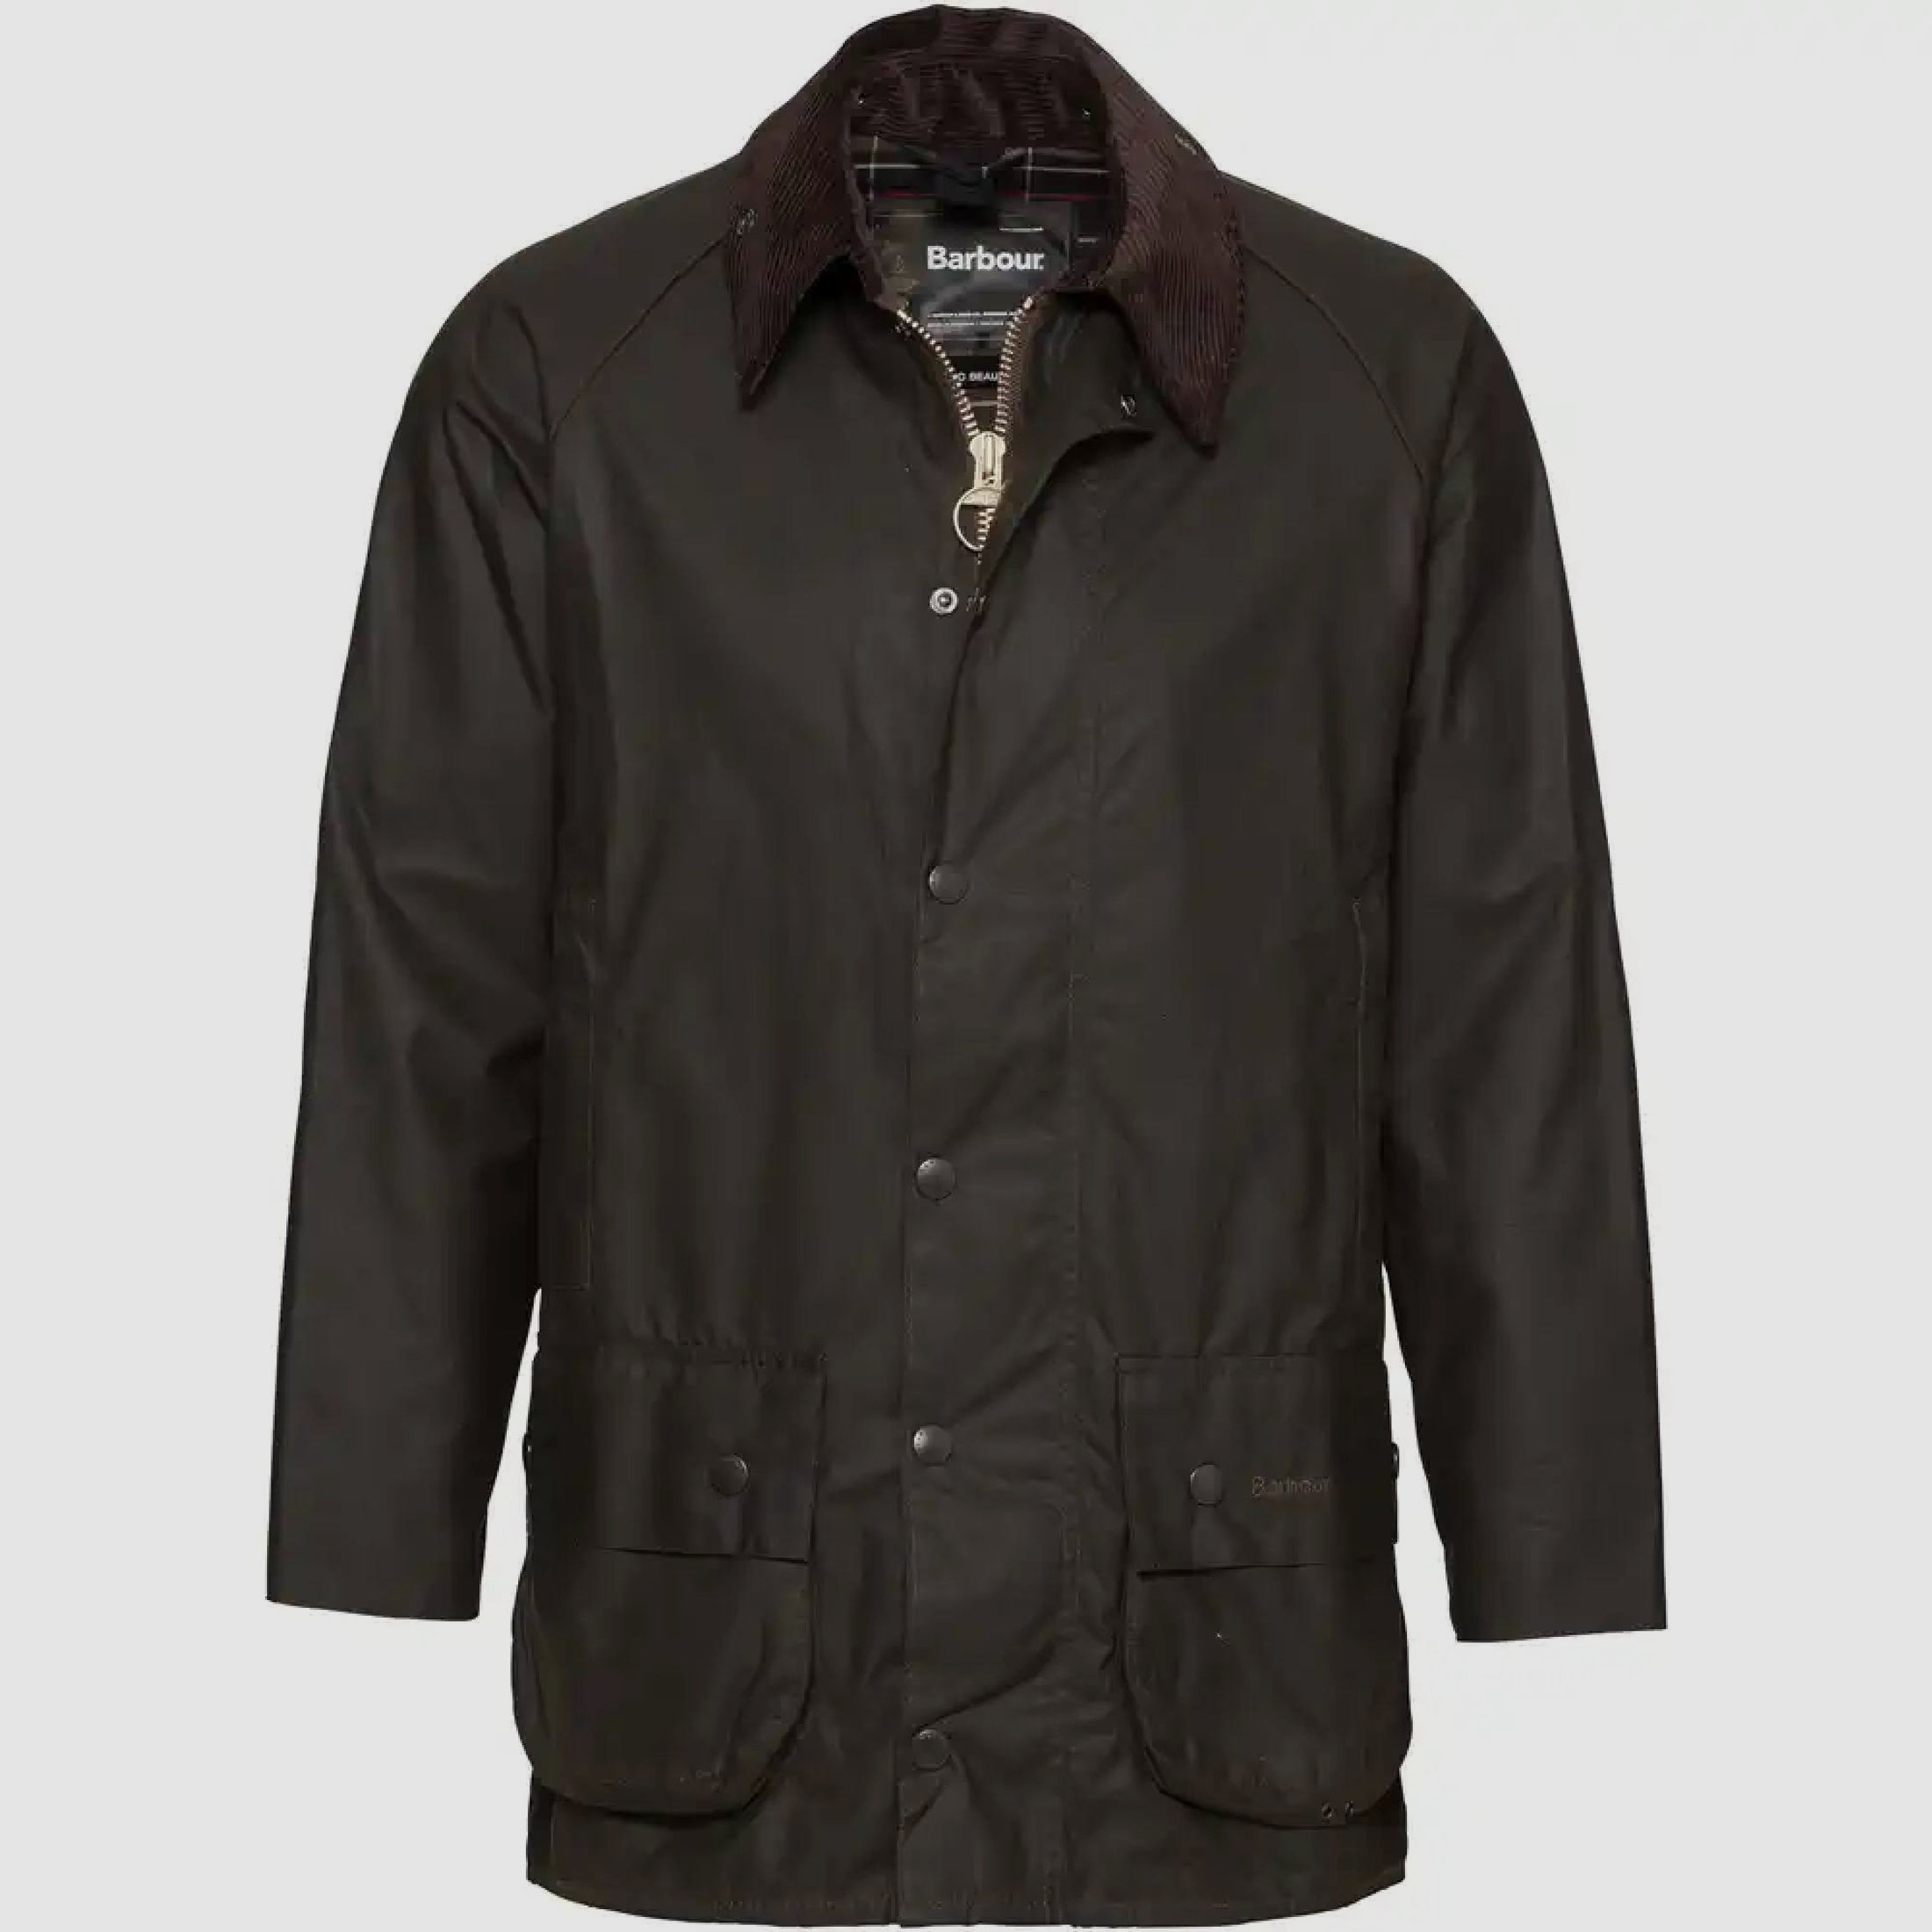 Barbour Wachsjacke Classic Beaufort, Farbe Olive